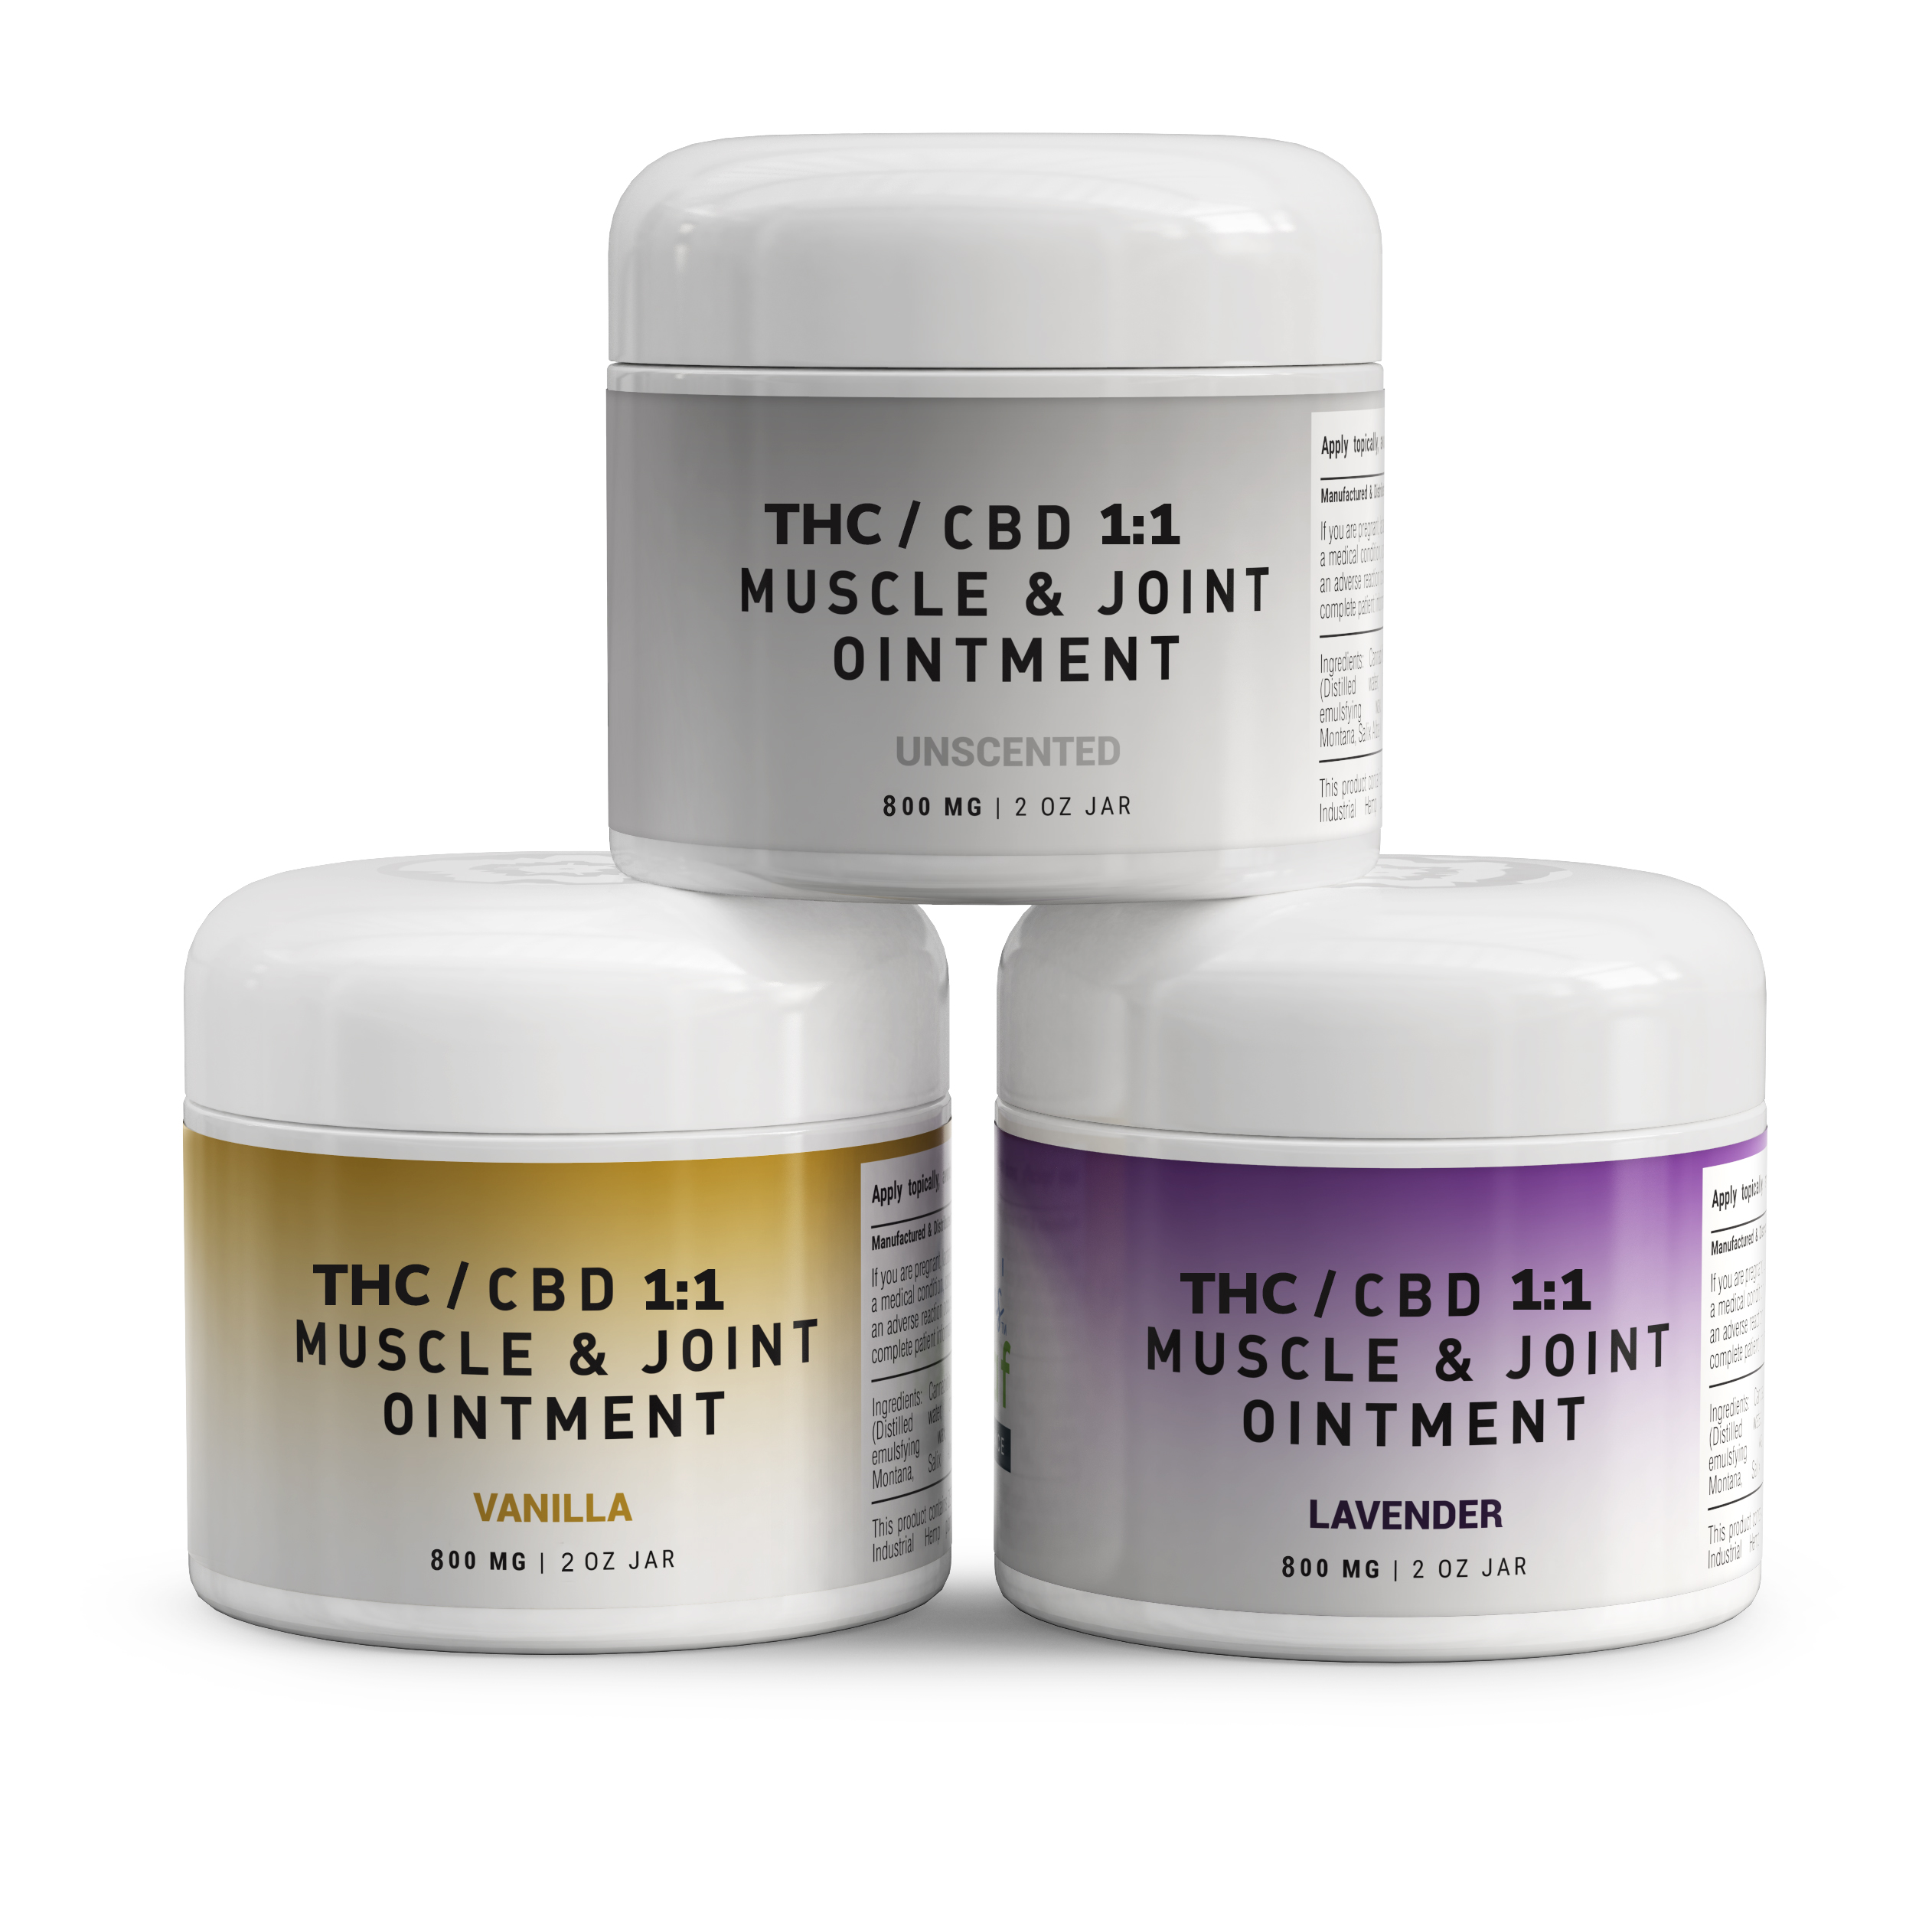 Dr. Burns ReLeaf™ Muscle & Joint Ointment is a THC infused powerhouse for pain management. It is available for qualifying patients at select Arizona licensed medical marijuana dispensaries.